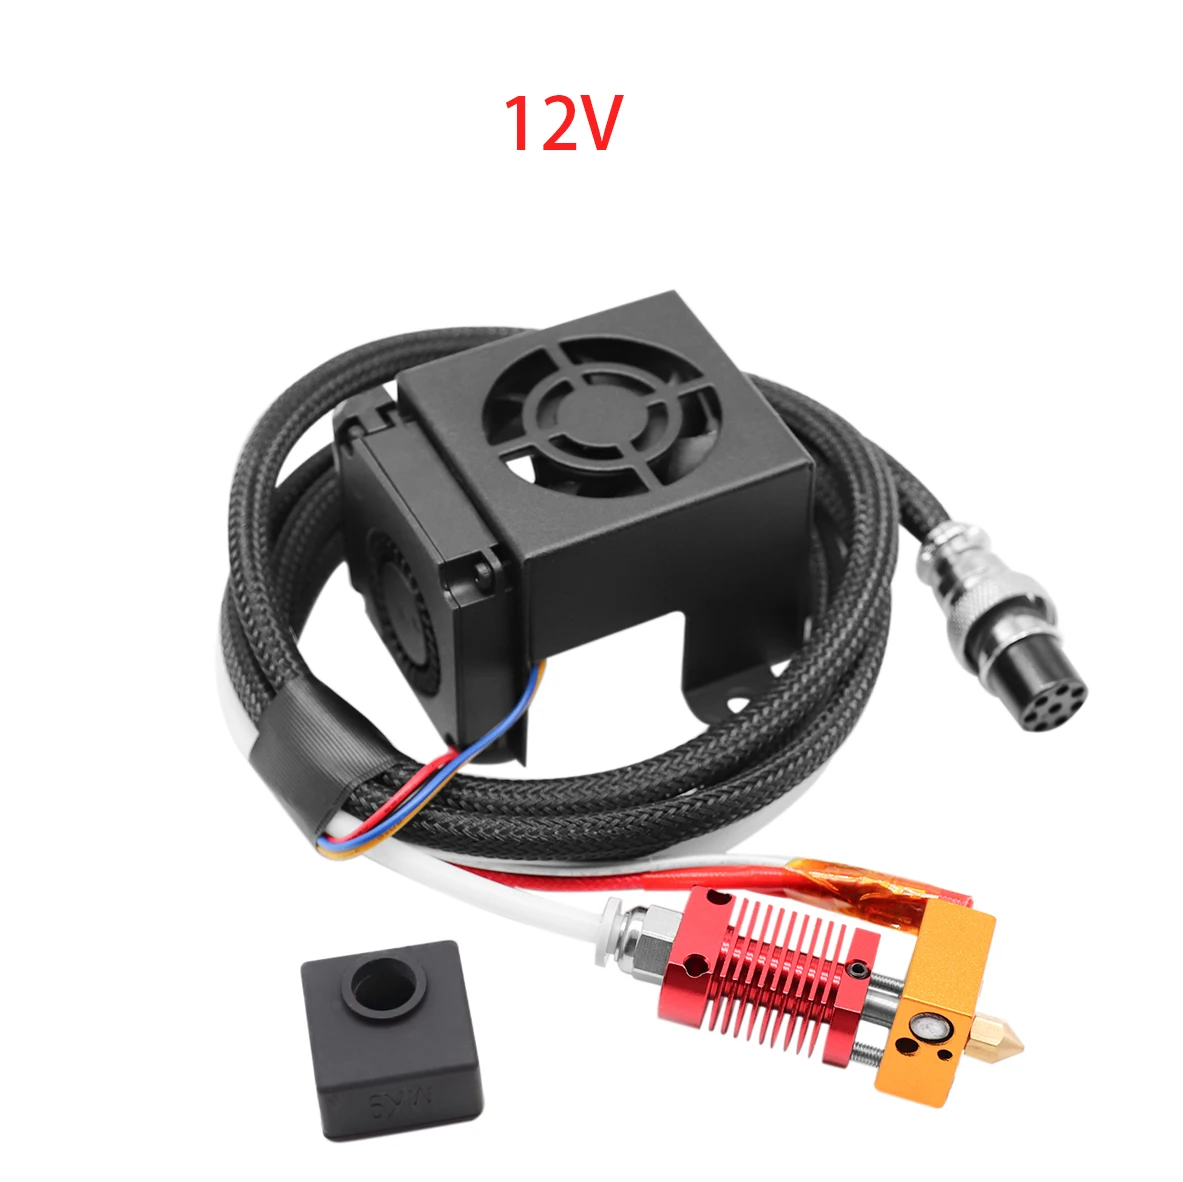 3d printed brushless motor Original Extruder Hotend Kits 12V 24V Heating End Nozzles Wind Fan Kits For Creality CR10/10s Ender 3/3s 3D Printer Accessories canon printer print head 3D Printer Parts & Accessories